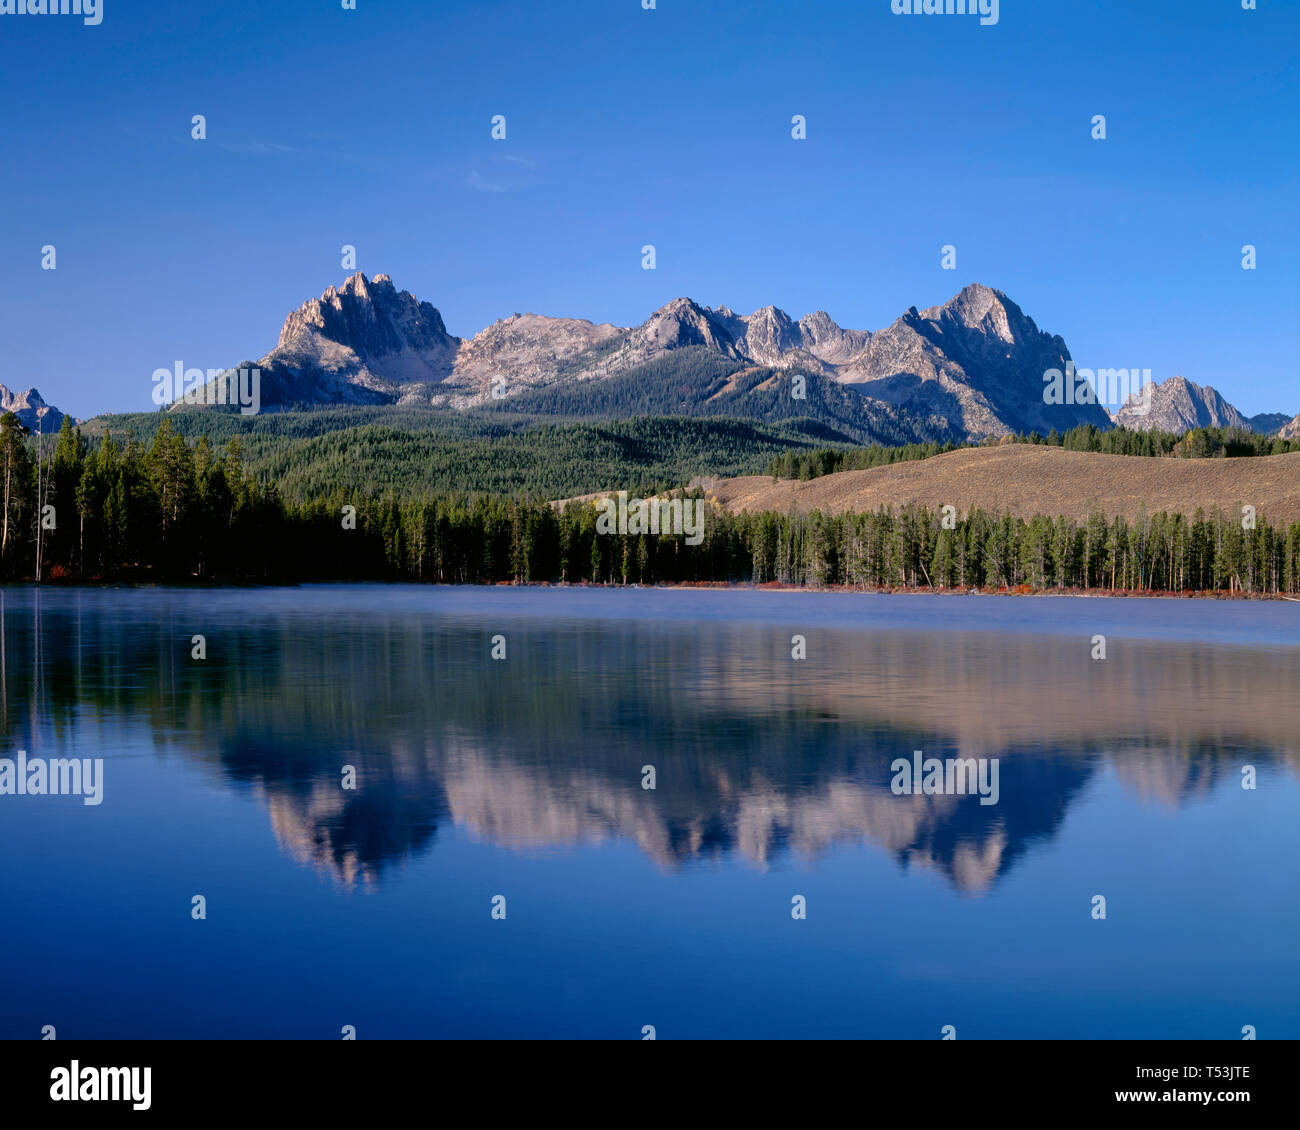 https://c8.alamy.com/comp/T53JTE/usa-idaho-sawtooth-national-recreation-area-mt-heyburn-and-peaks-of-the-sawtooth-range-reflect-in-little-redfish-lake-in-early-morning-T53JTE.jpg